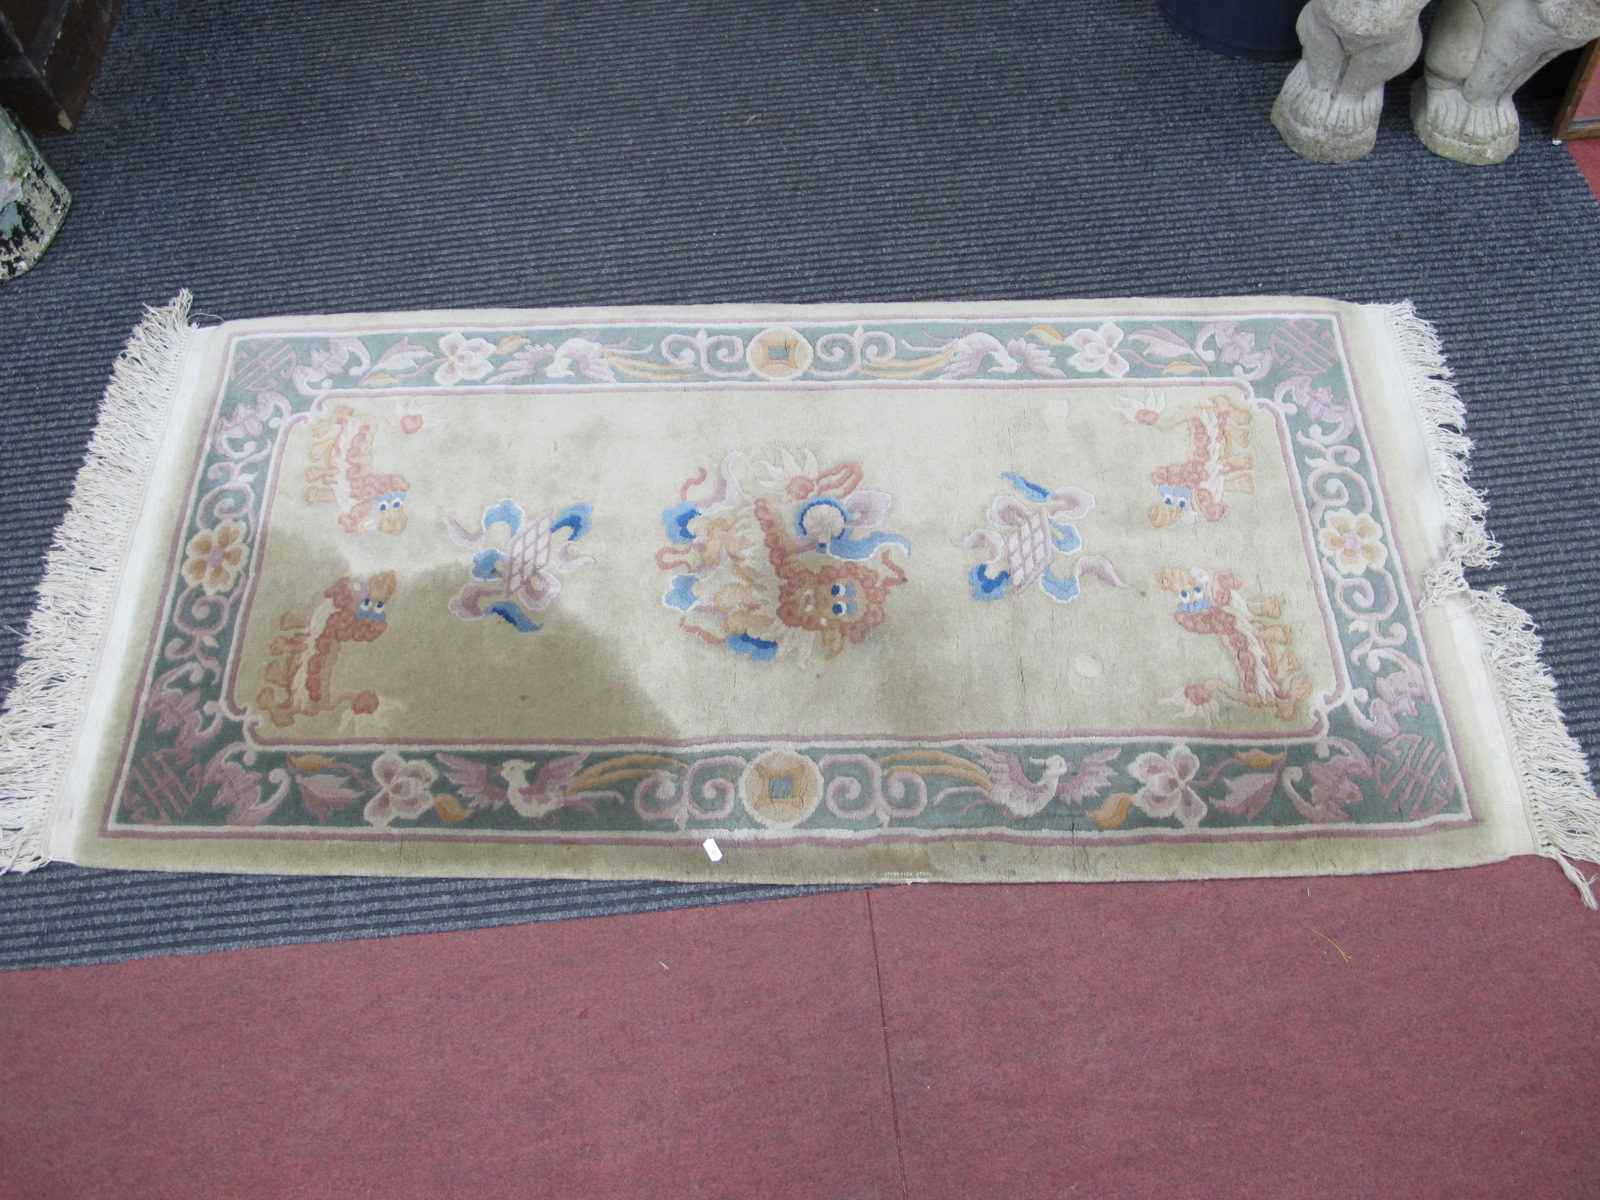 A Chinese Wool Tasseled Rug, featuring dragons and birds, on mustard ground, 158 x 78cm.